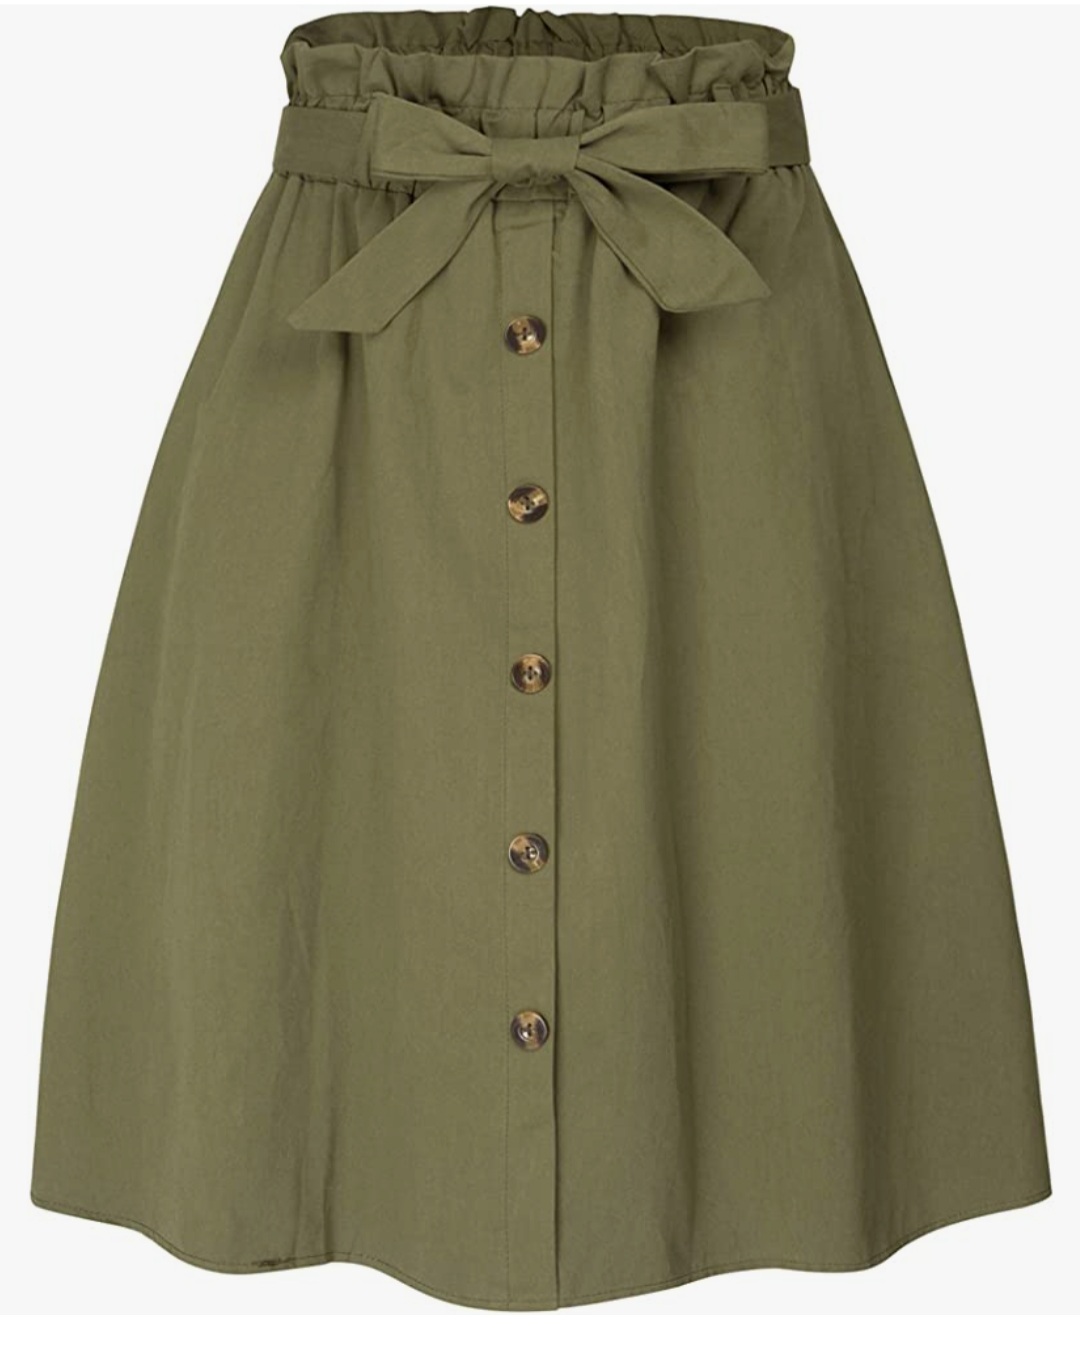 Women A-Line High Waisted Button Front Drawstring Pleated Midi Skirt Knee Length